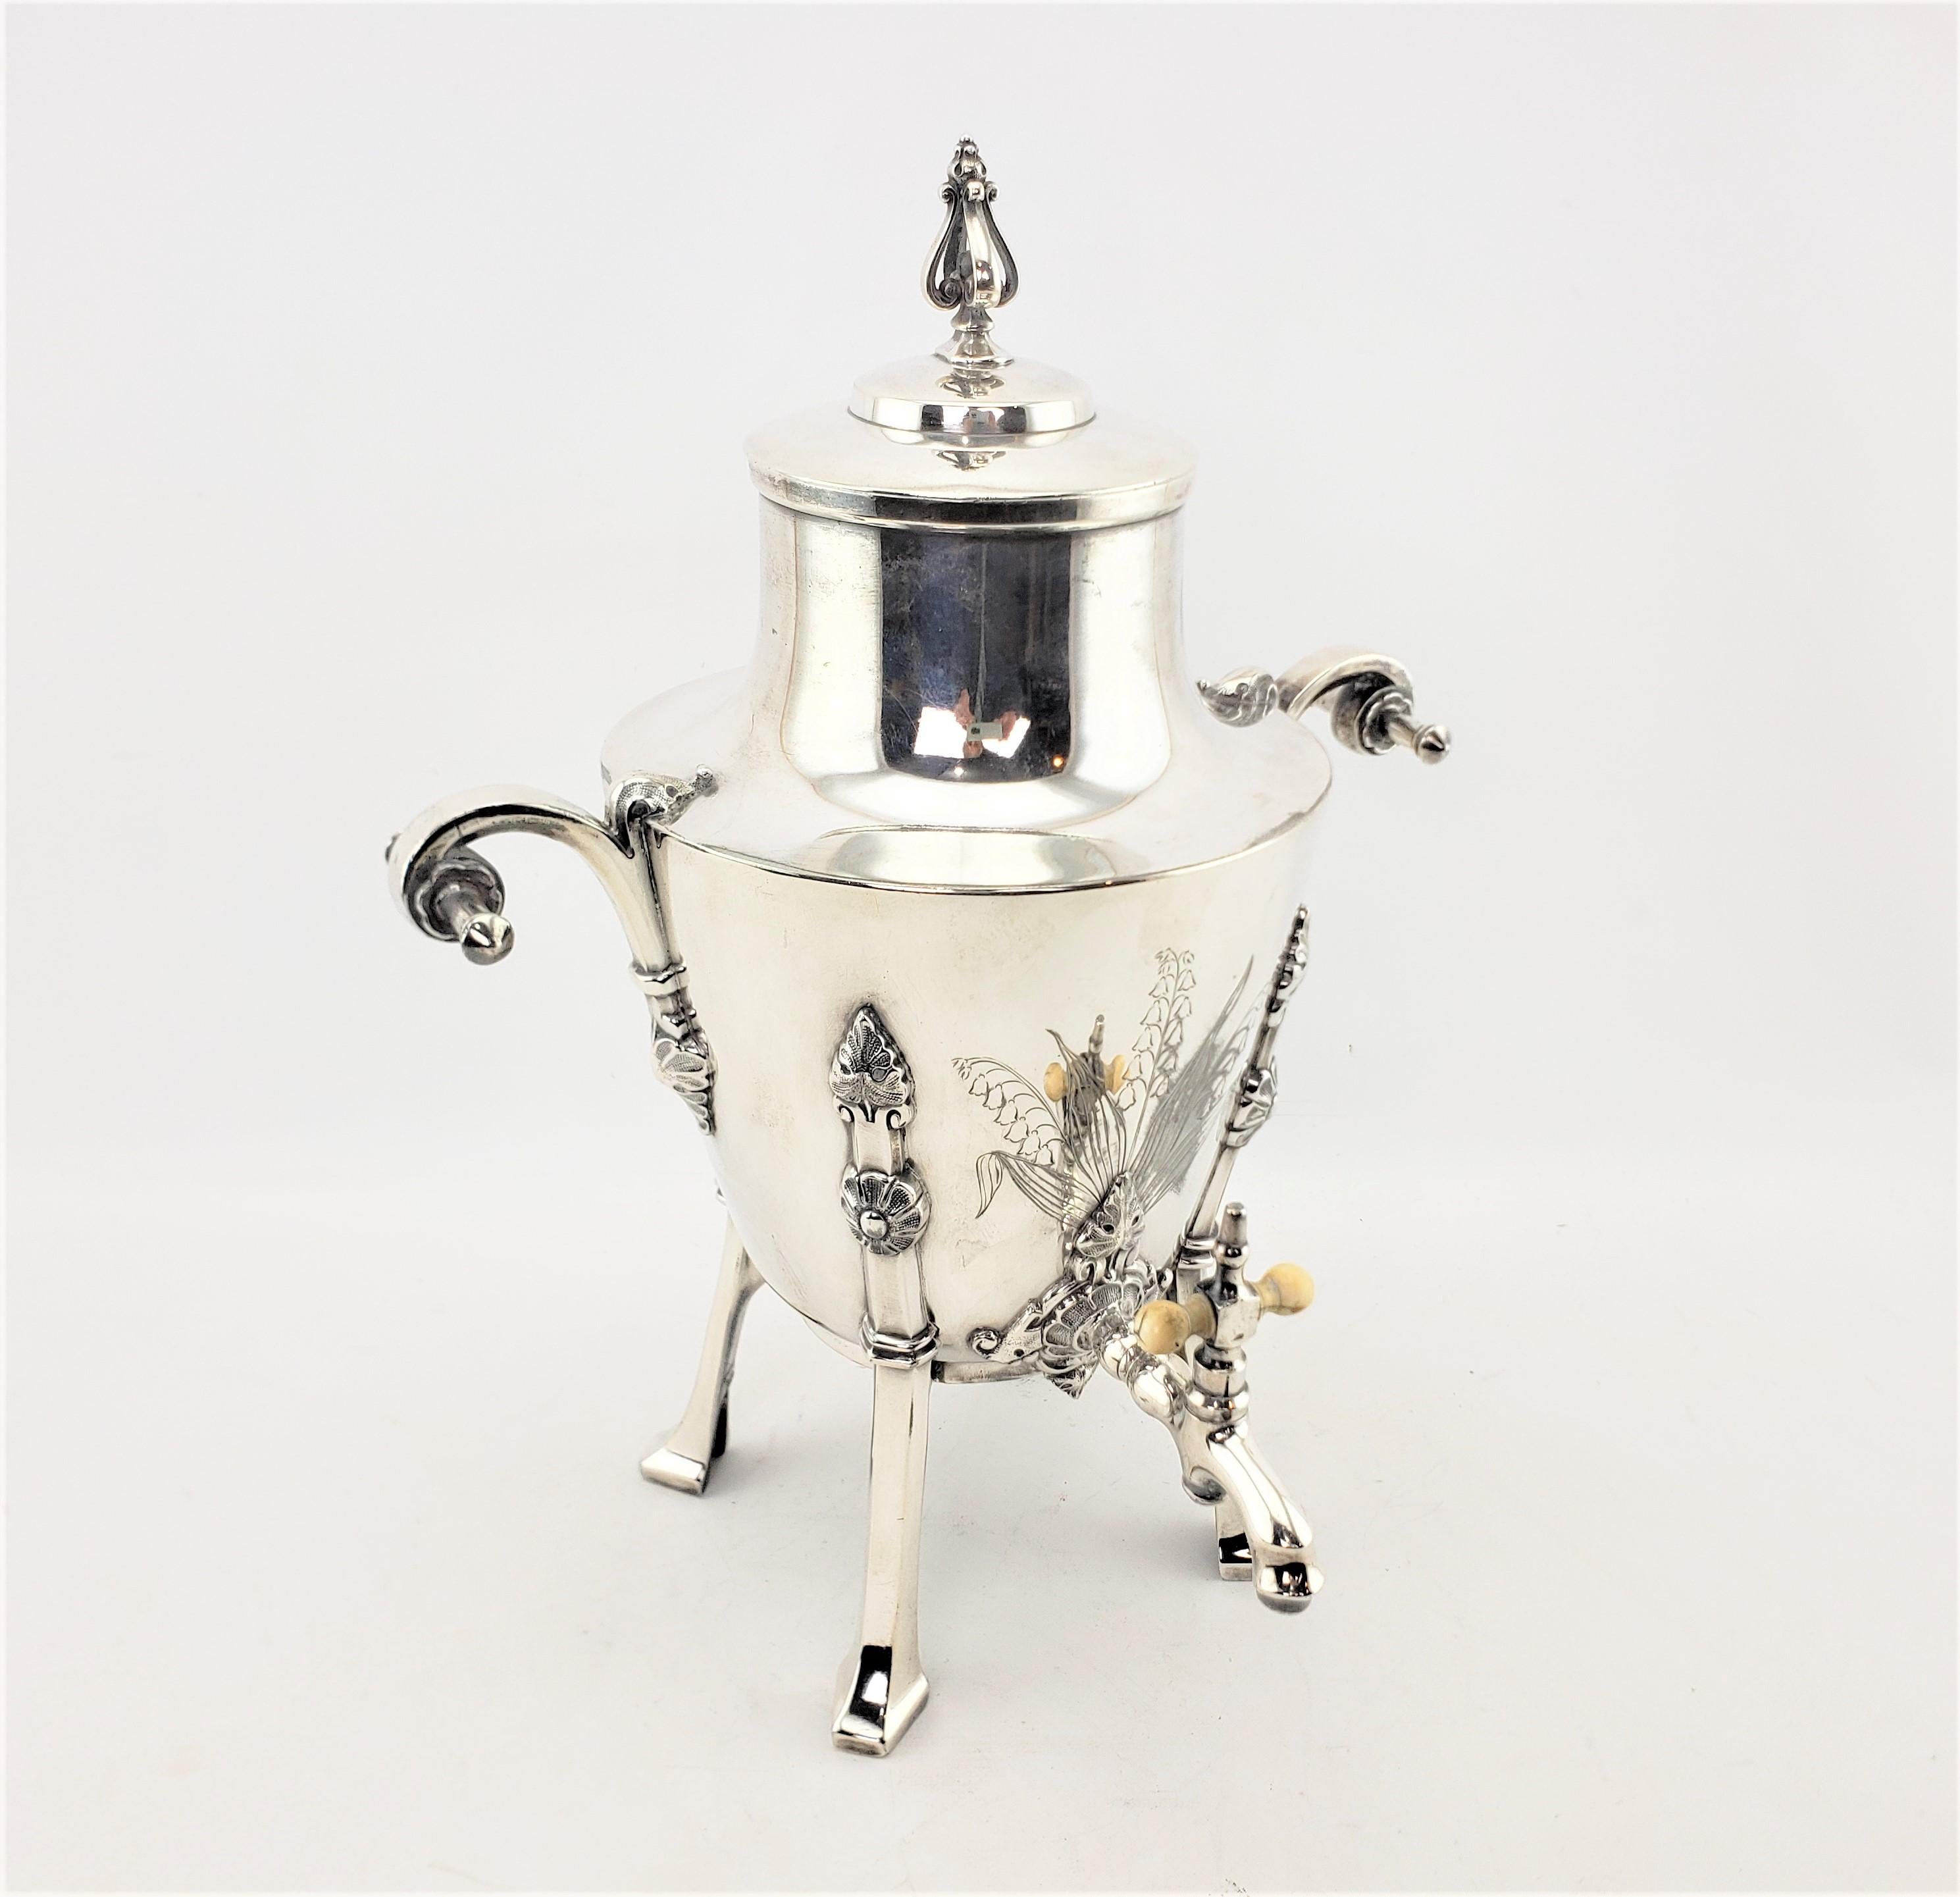 This antique silver plated hot water urn was produced by the well known Simpson, Hall & Miller Co. of the United States in approximately 1900 in the period Aesthetic Movement style. The urn features nicely engraved Lily of the Valley stylized